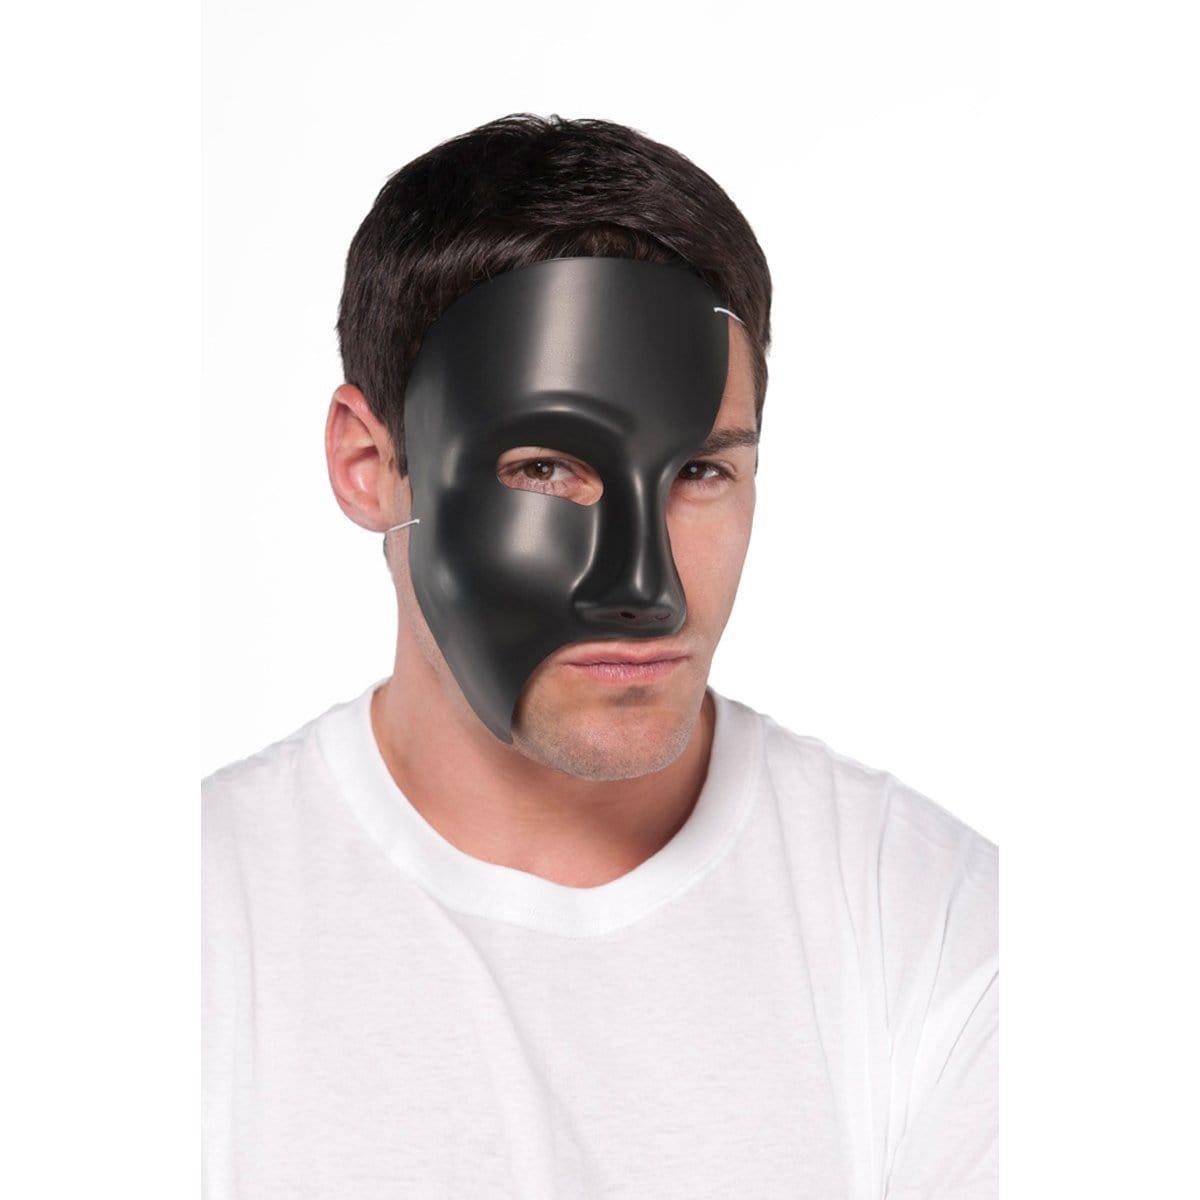 Buy Costume Accessories Black phantom mask sold at Party Expert